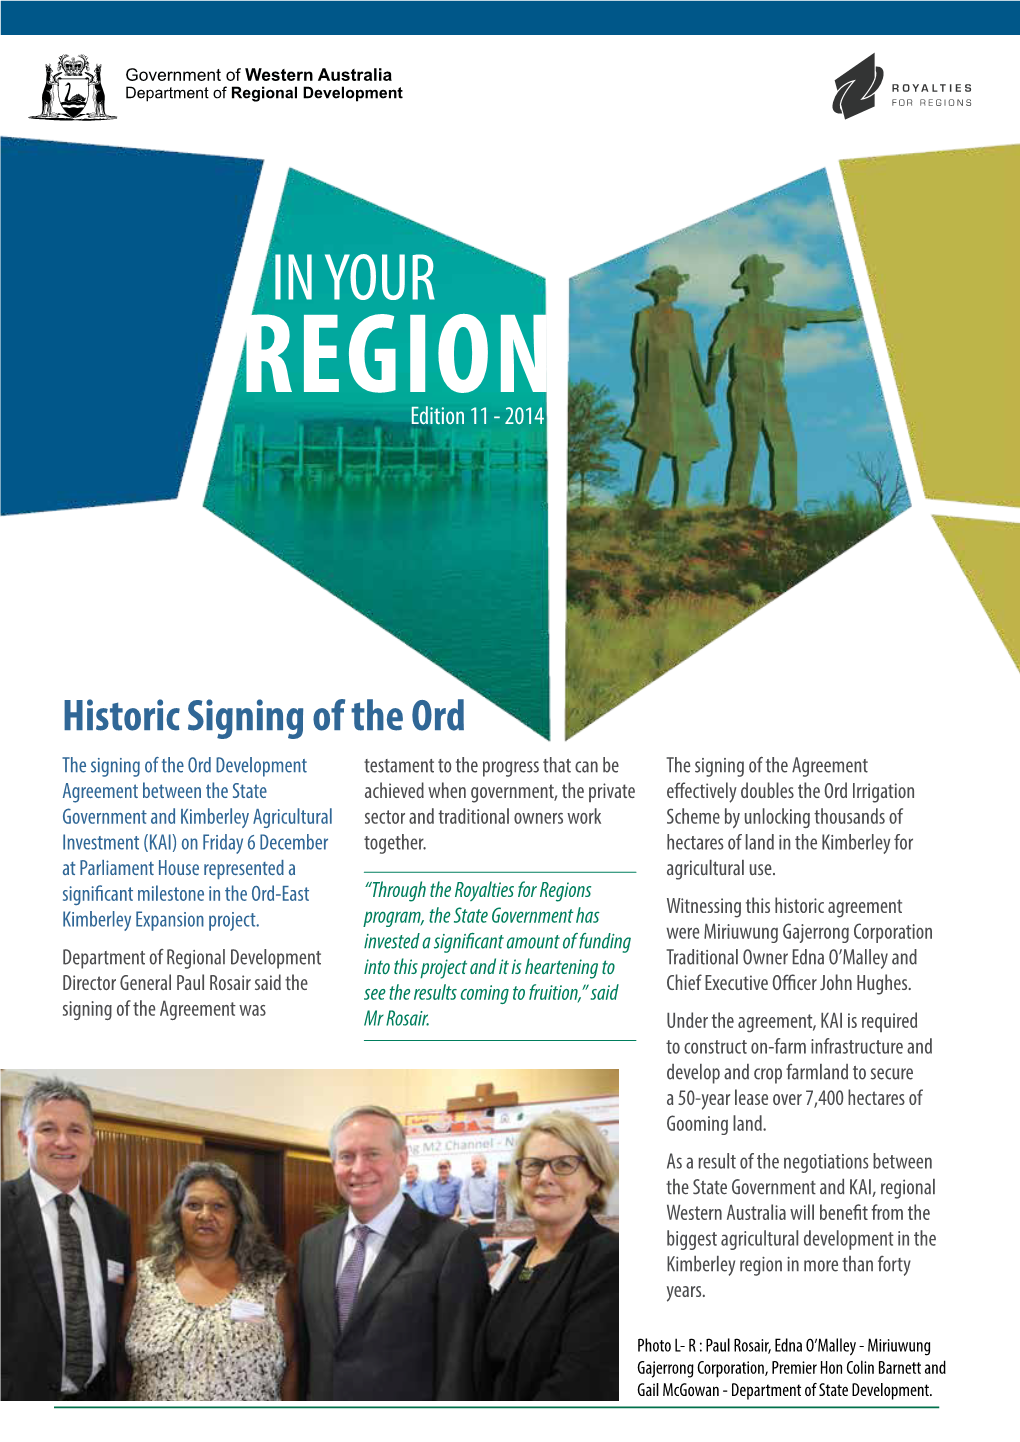 IN YOUR REGION Edition 11 - 2014